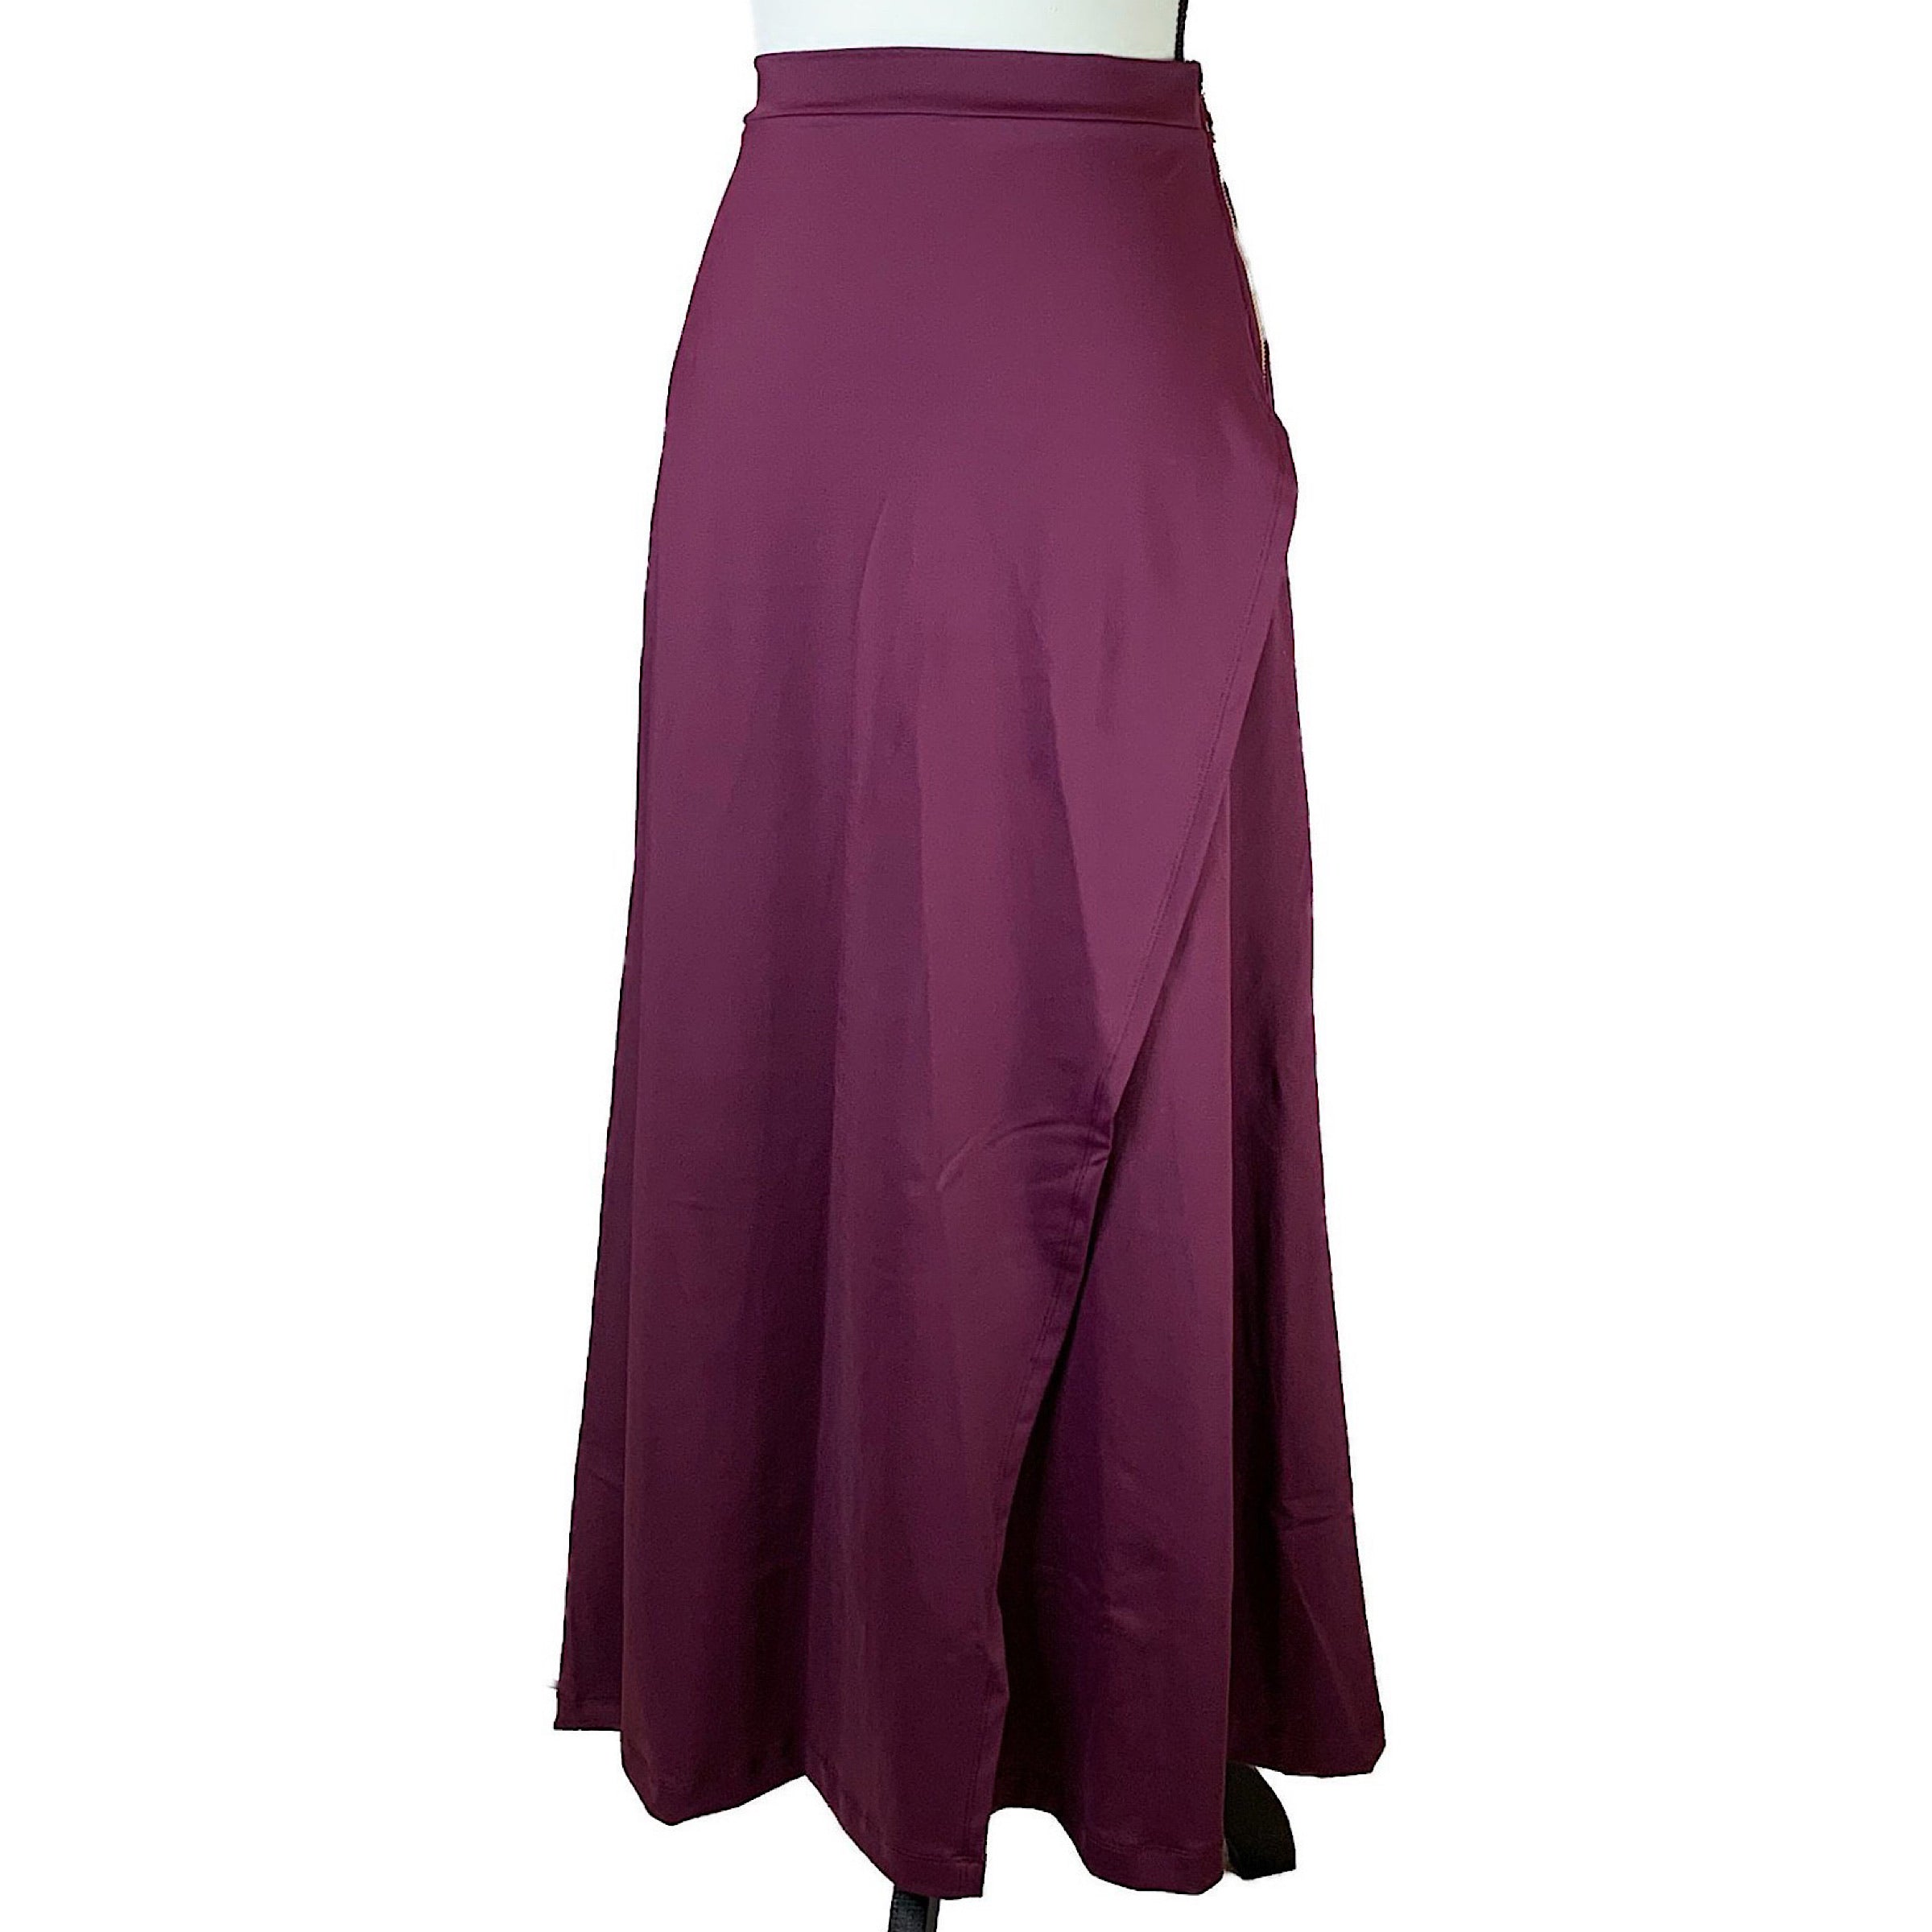 Issey Miyake Pleats Please dark purple pleated maxi skirt with front zipper  - V A N II T A S